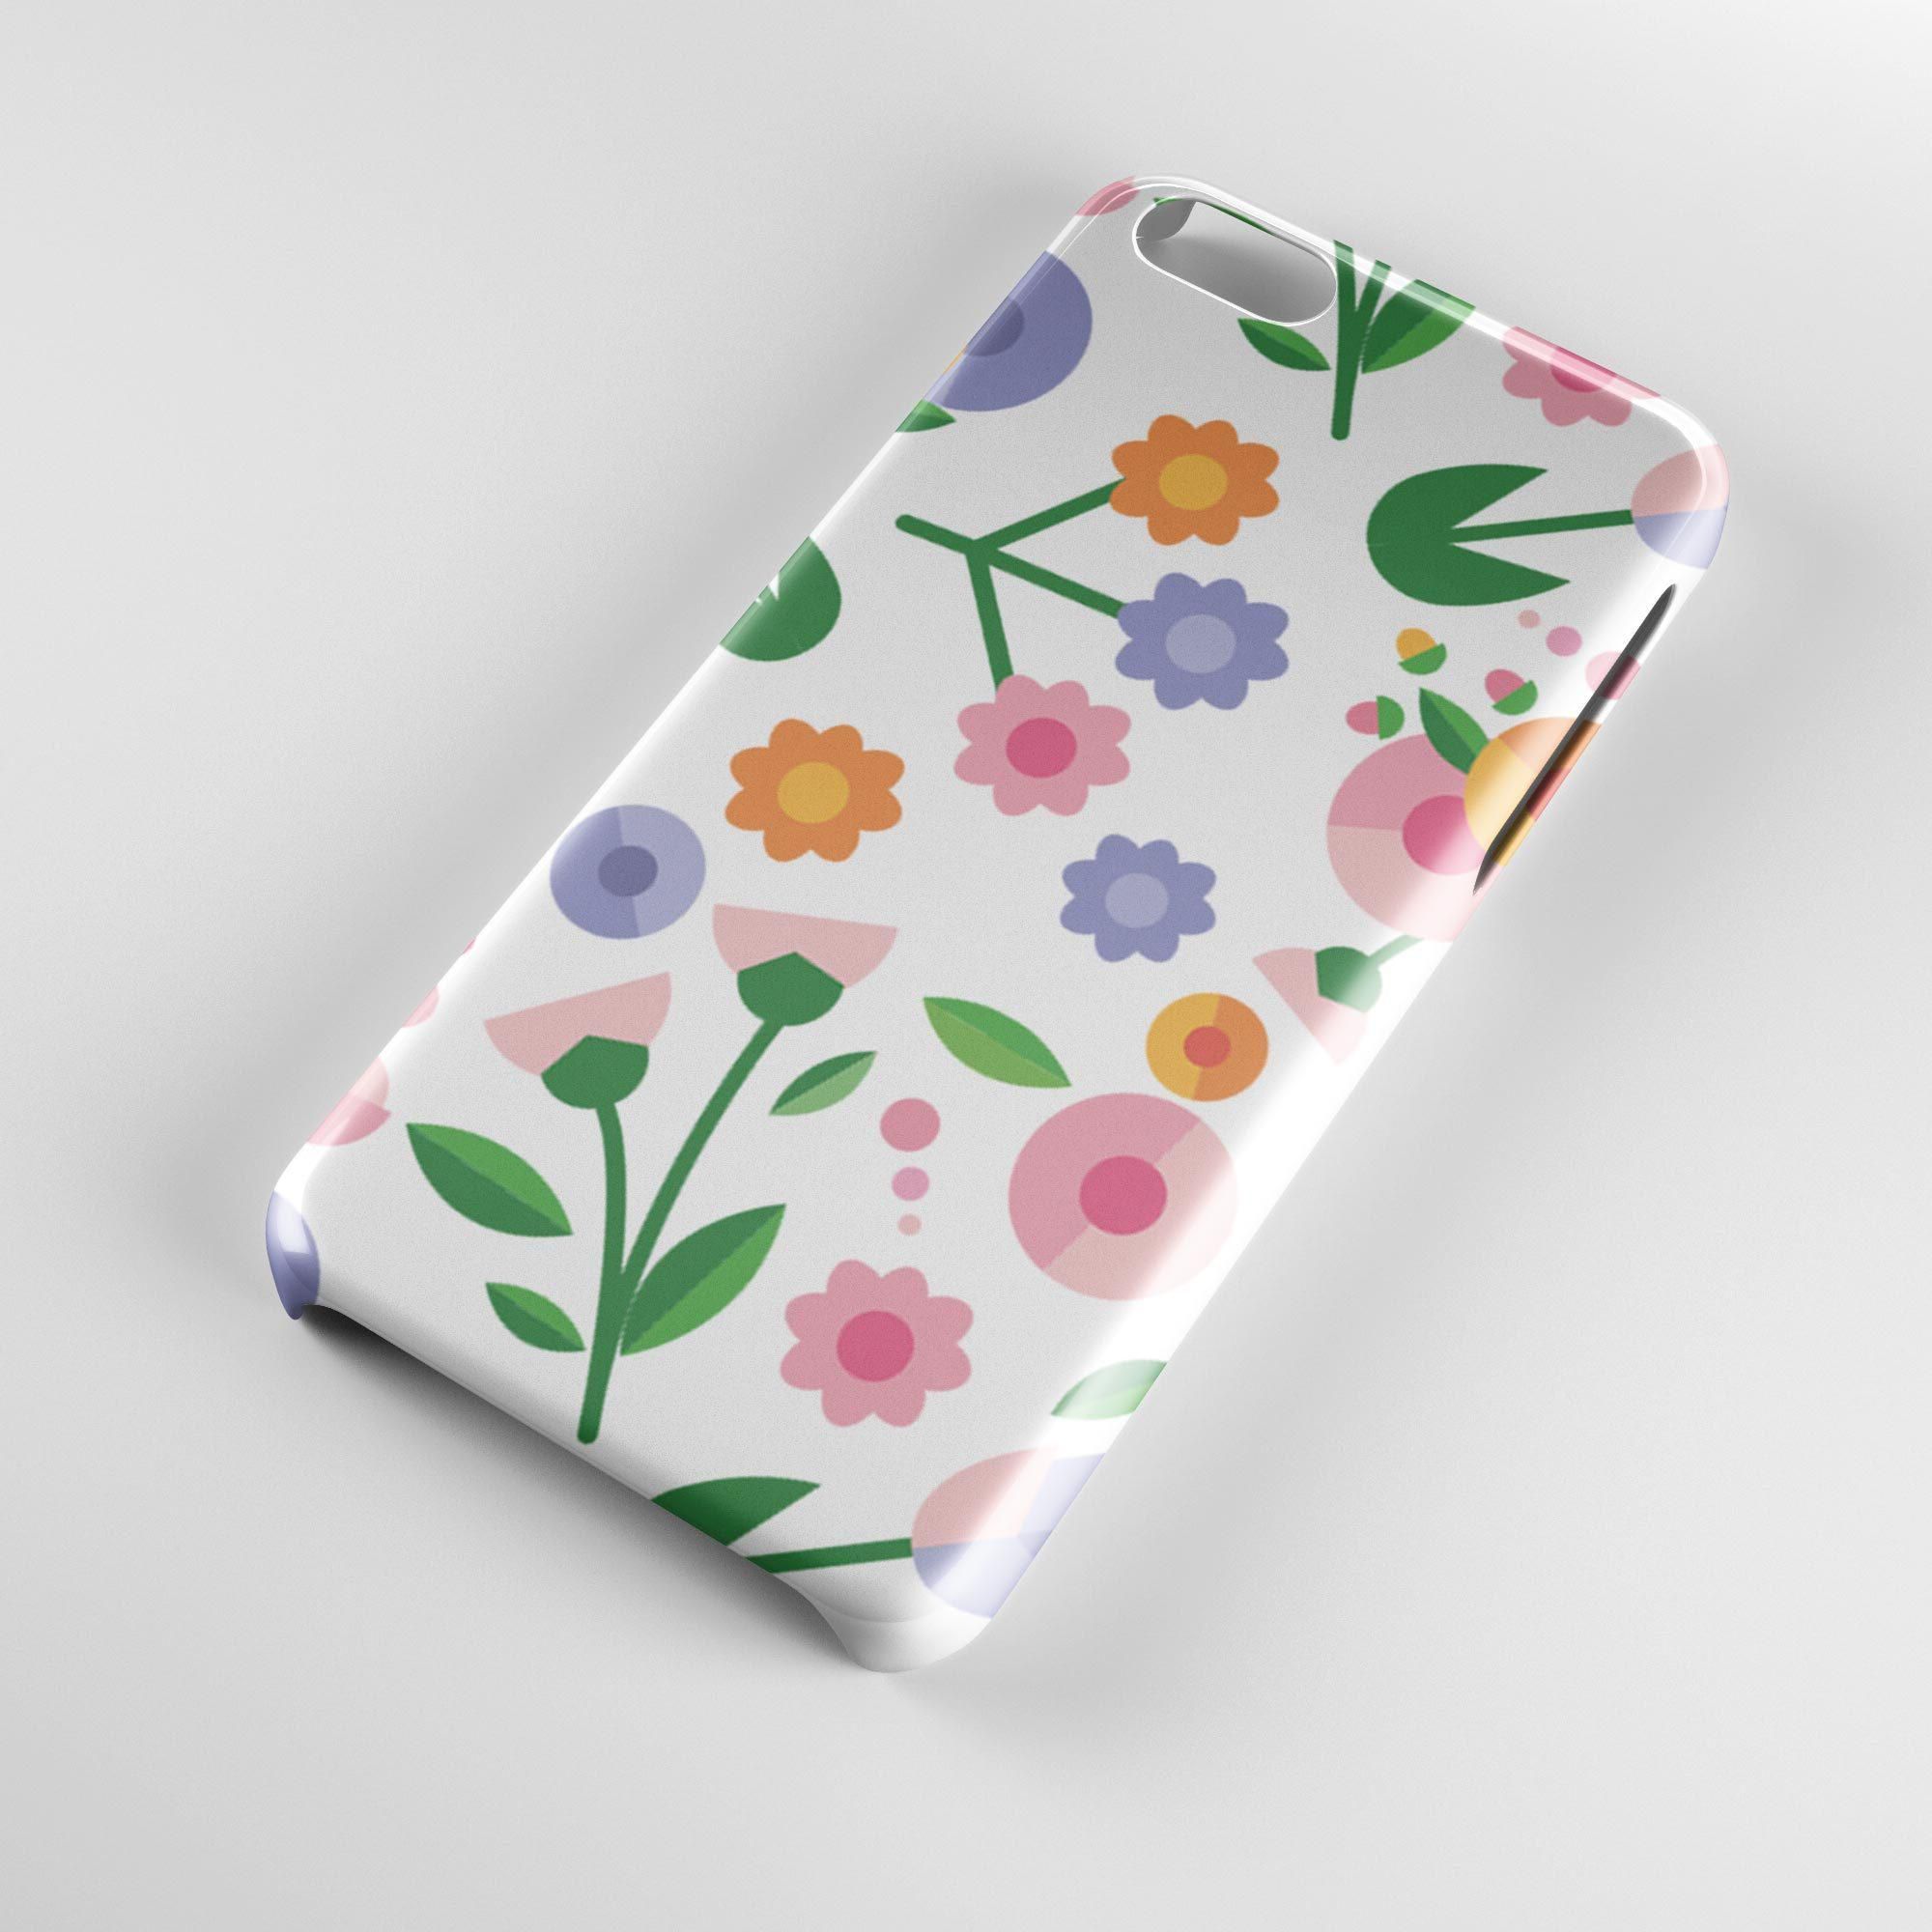 Pastel Pixellated Floral Phone for Samsung Galaxy Alpha G850